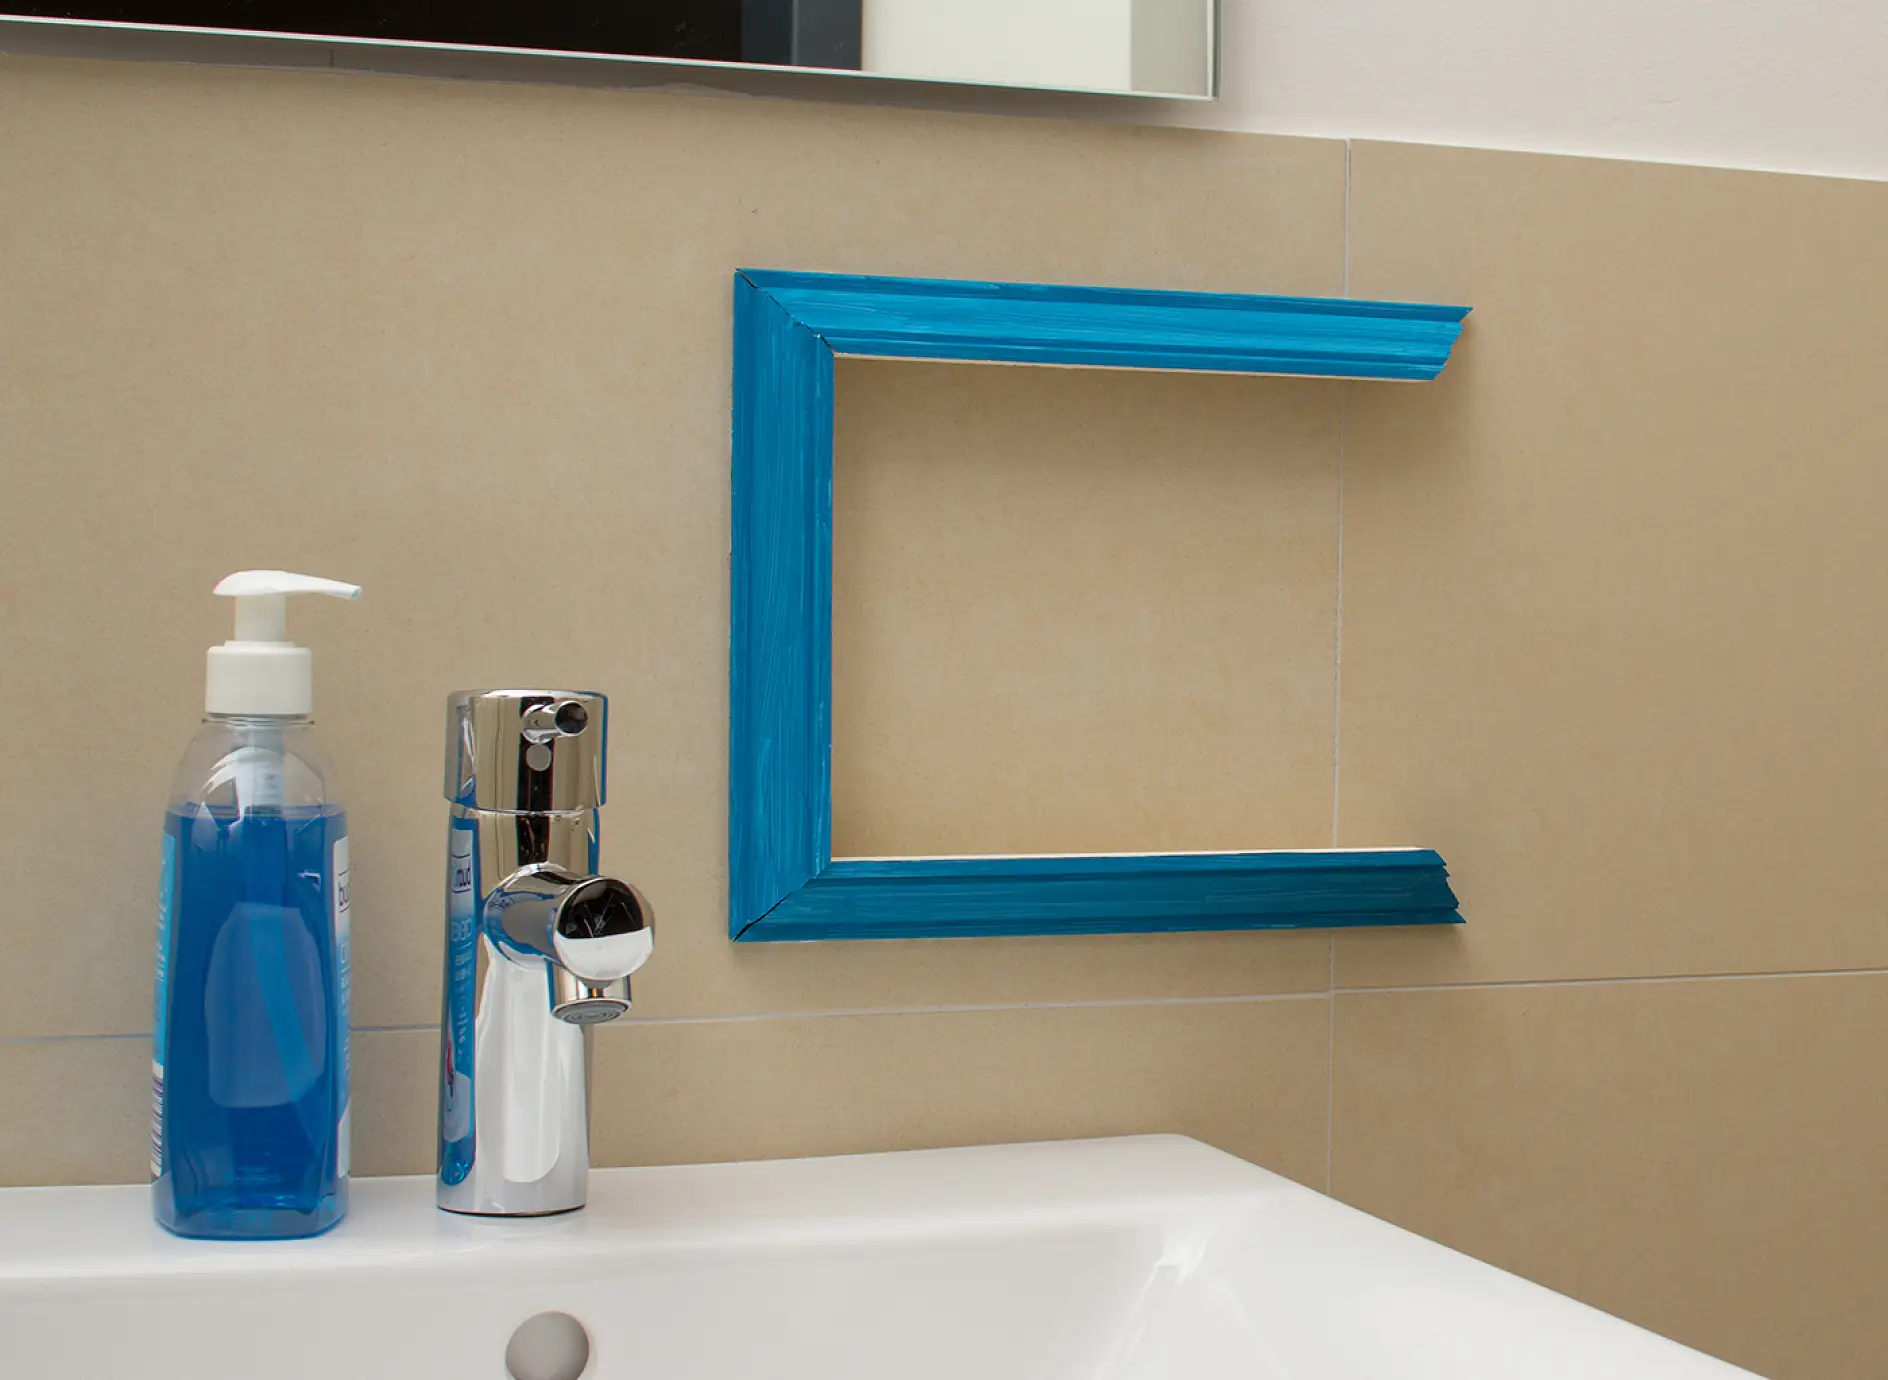 Three plaster moldings are attached with tesa Powerbond® MIRROR on the bathroom tiles